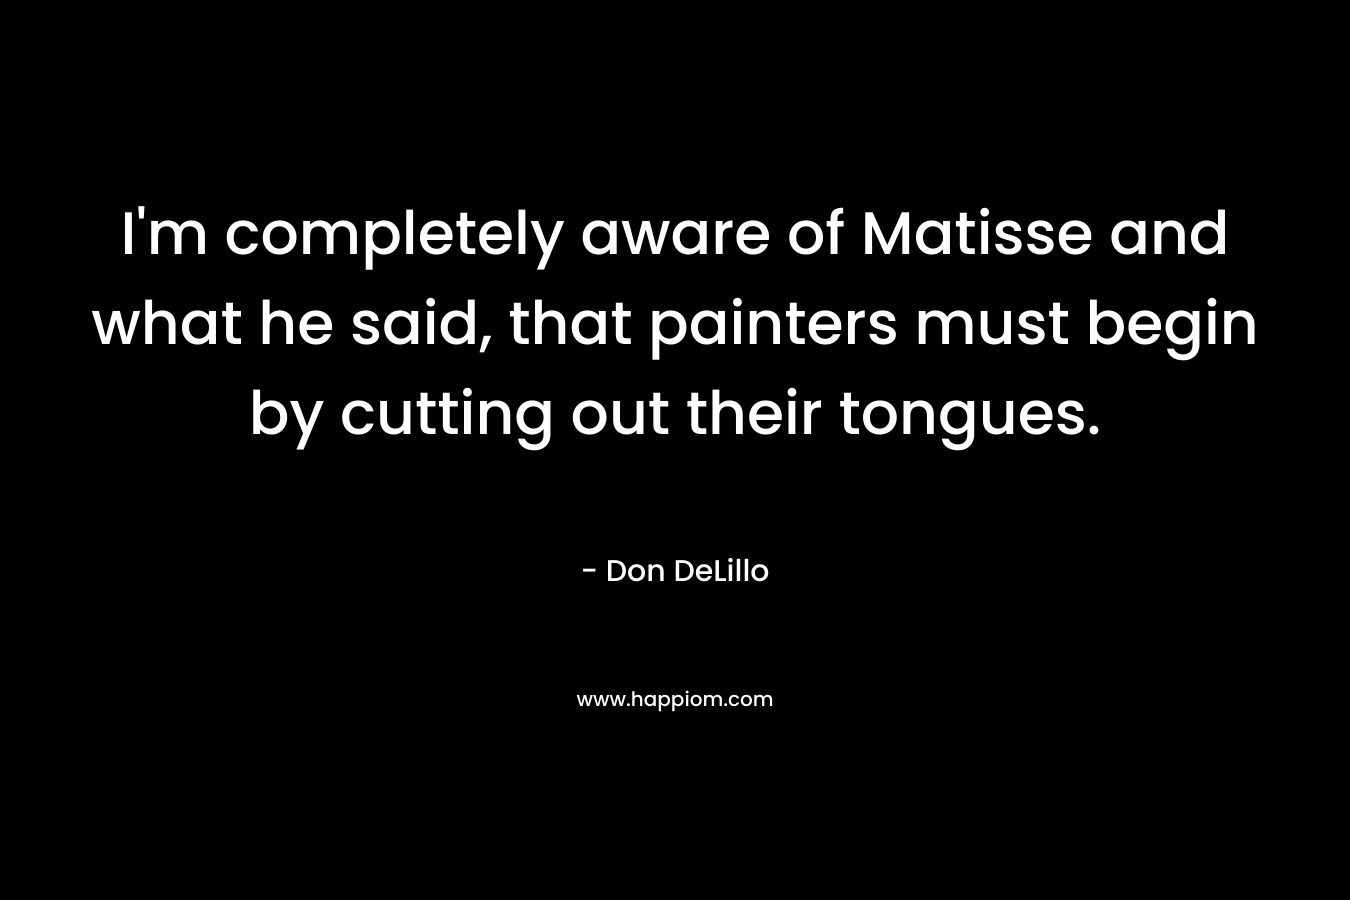 I’m completely aware of Matisse and what he said, that painters must begin by cutting out their tongues. – Don DeLillo